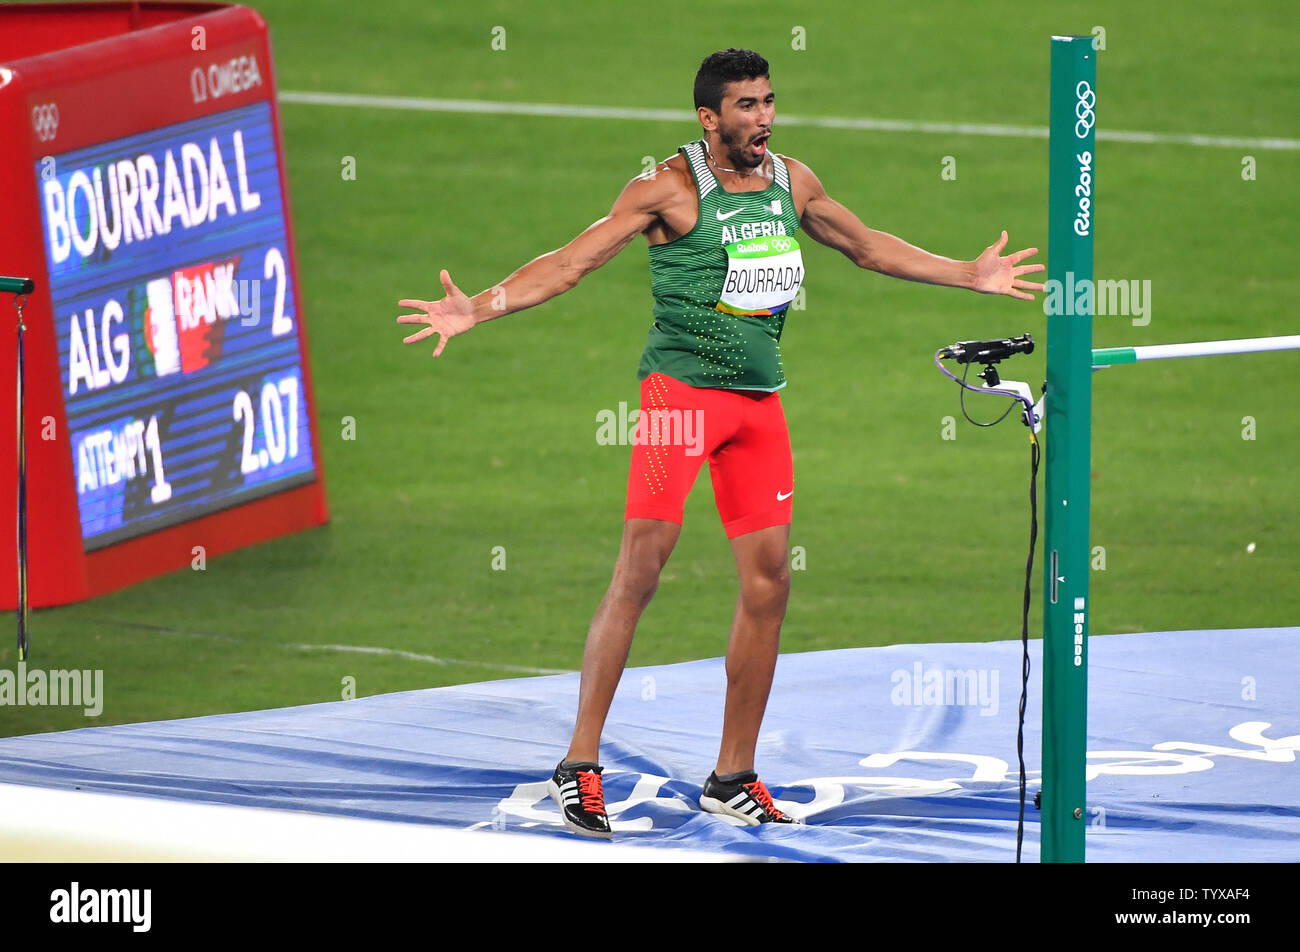 Larbi Bourrada of Algeria reacts after a jump as he  competes in the Men's High Jump at the Olympic Stadium at the 2016 Rio Summer Olympics in Rio de Janeiro, Brazil, on August 17, 2016.        Photo by Kevin Dietsch/UPI Stock Photo